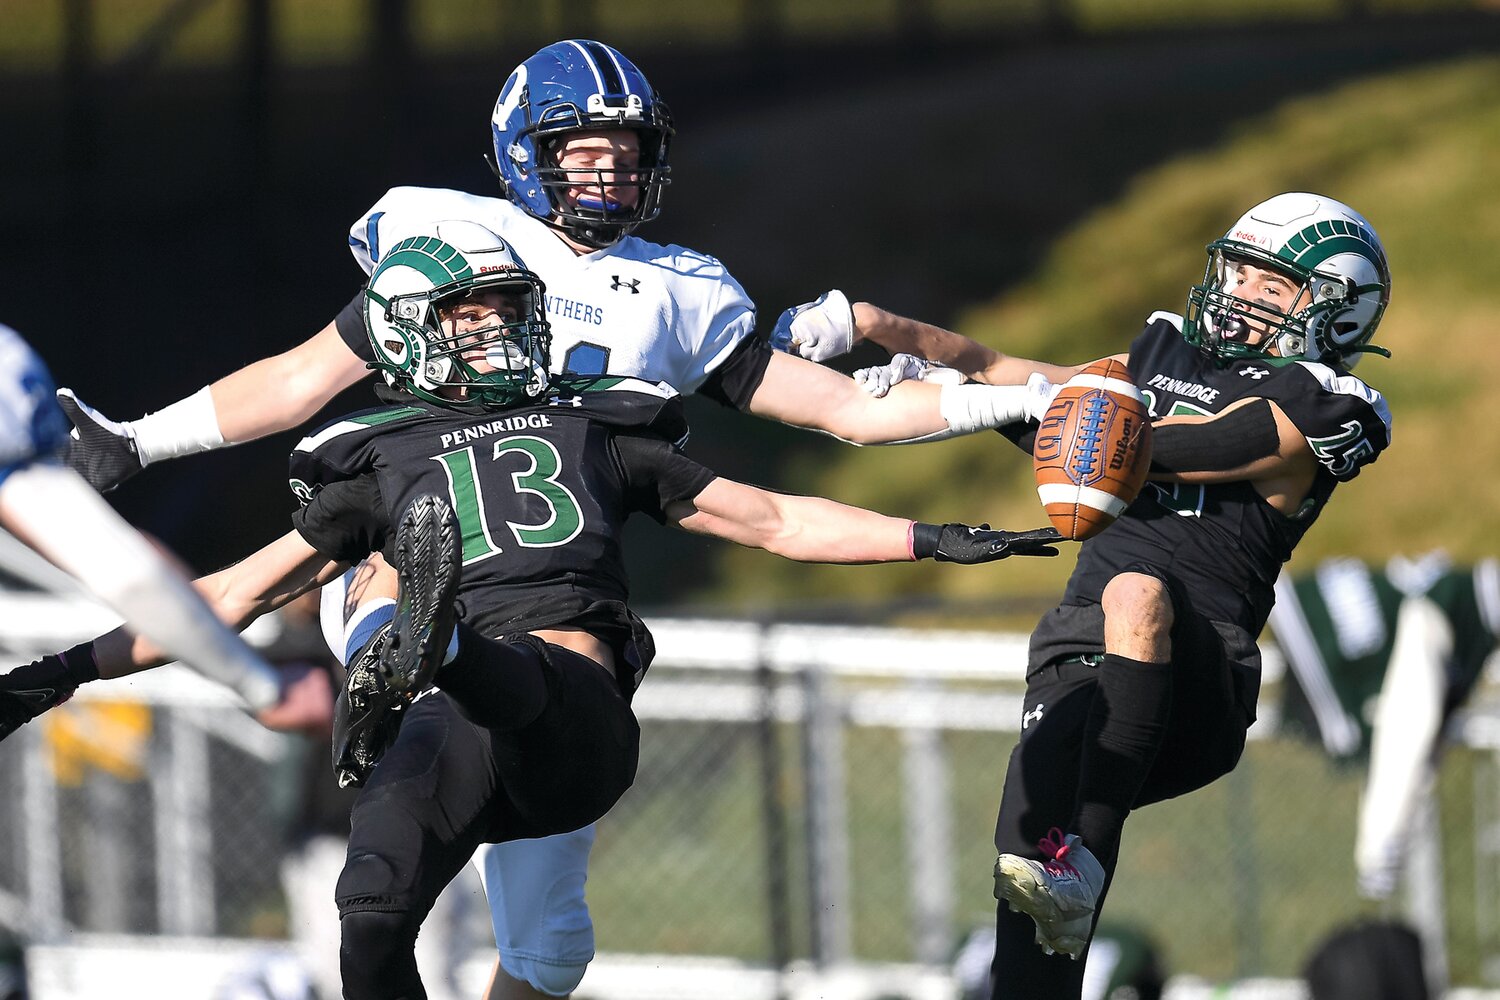 Pennridge’s Chase Marshall and Sam Kuhns break up a pass in the end zone intended for Quakertown’s Anthony Ferrugio.